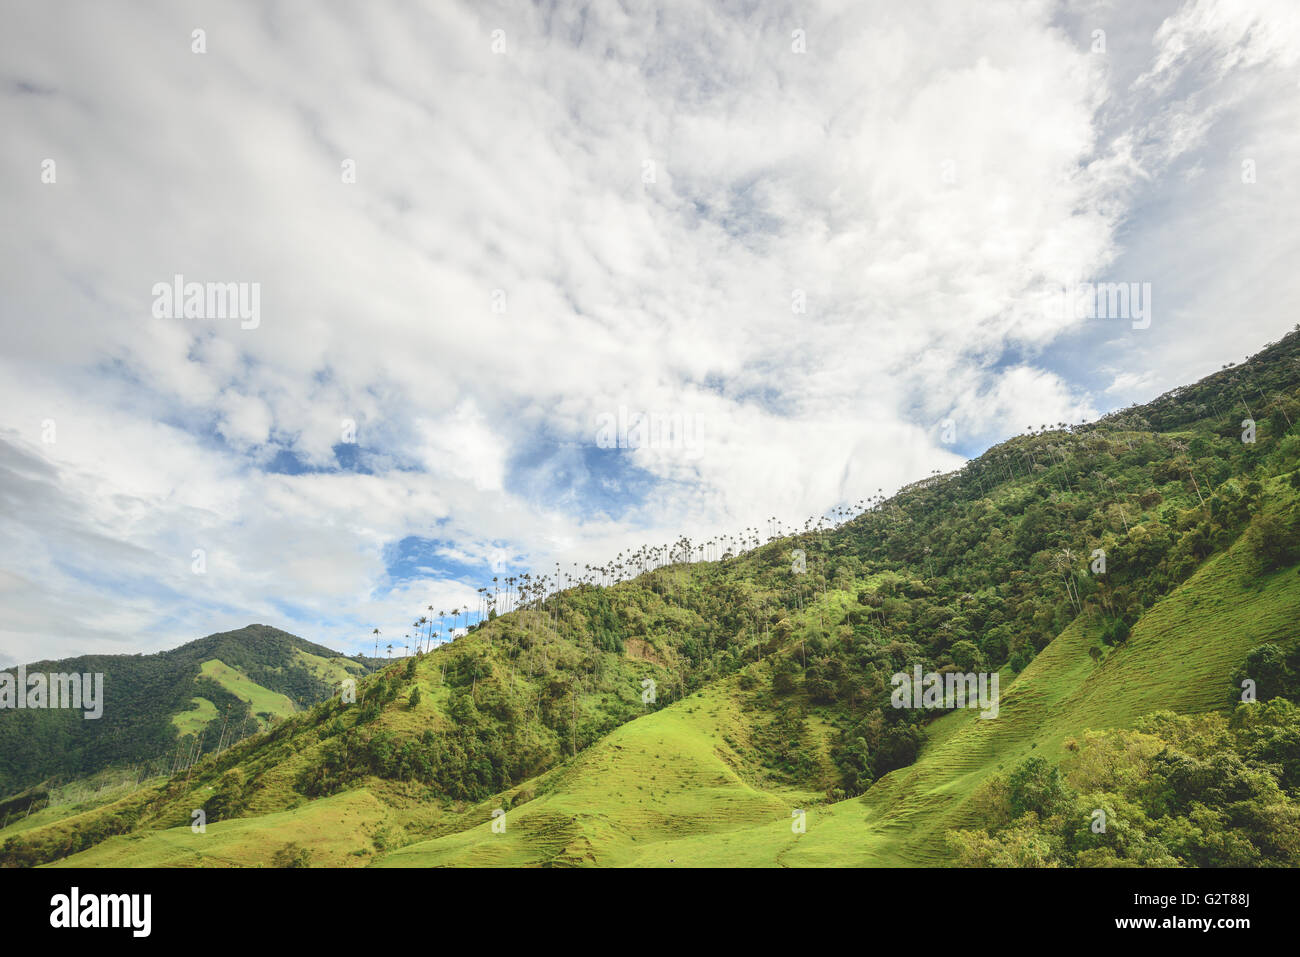 Hills and tall Palm trees in the Cocora Valley near Salento, Colombia Stock Photo